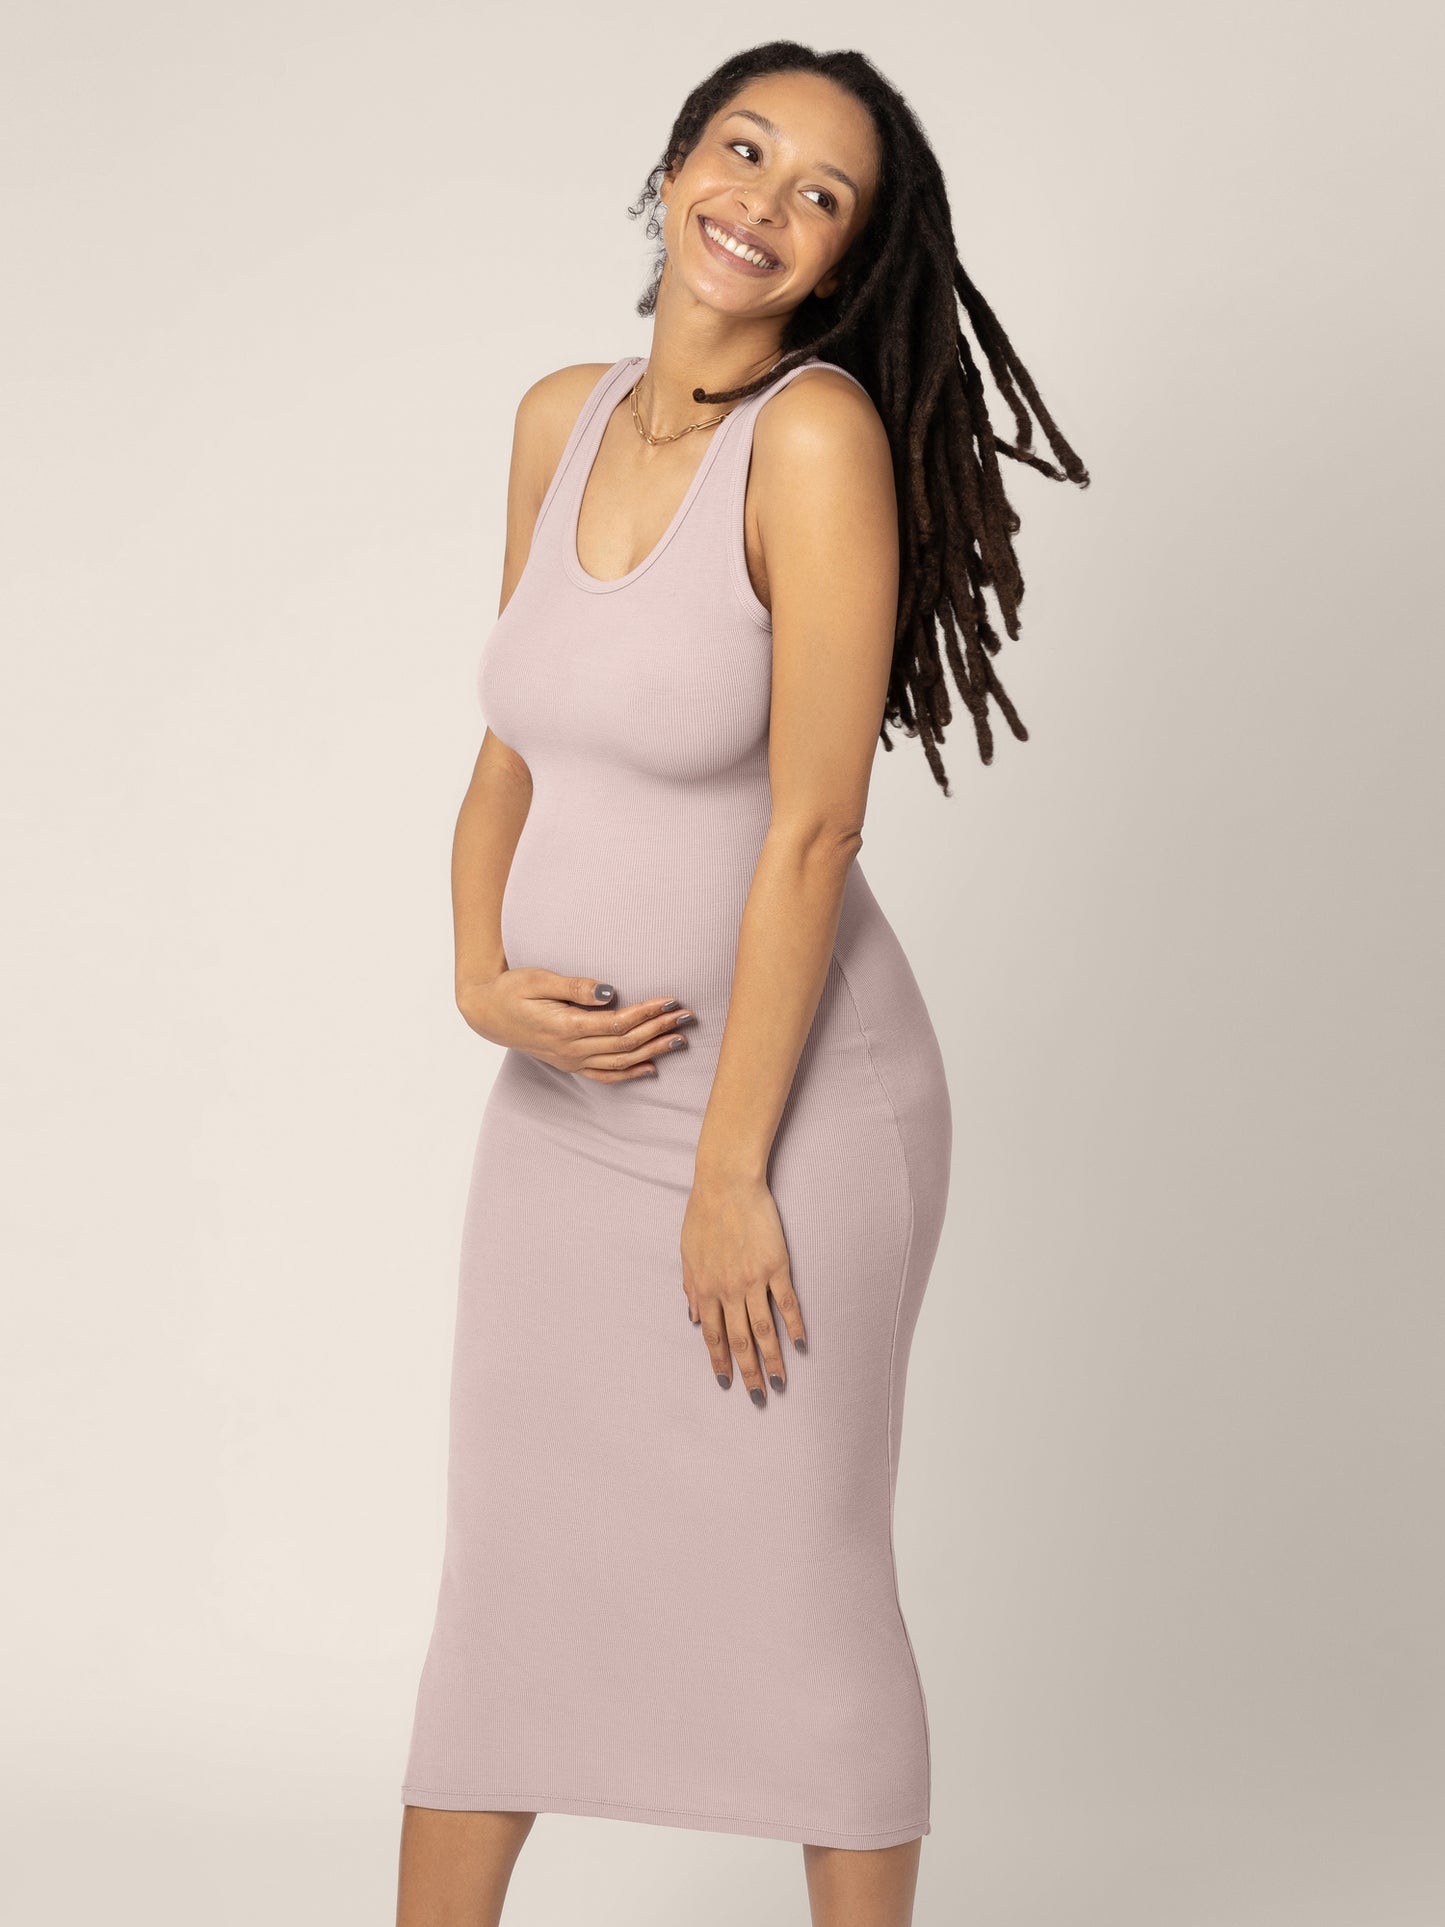 Model wearing the Olivia Ribbed Bamboo 2 in 1 Maternity & Nursing Dress in Lilac stone with her hand on her belly. @model_info:Chrissy is 5'11" and wearing a Medium.